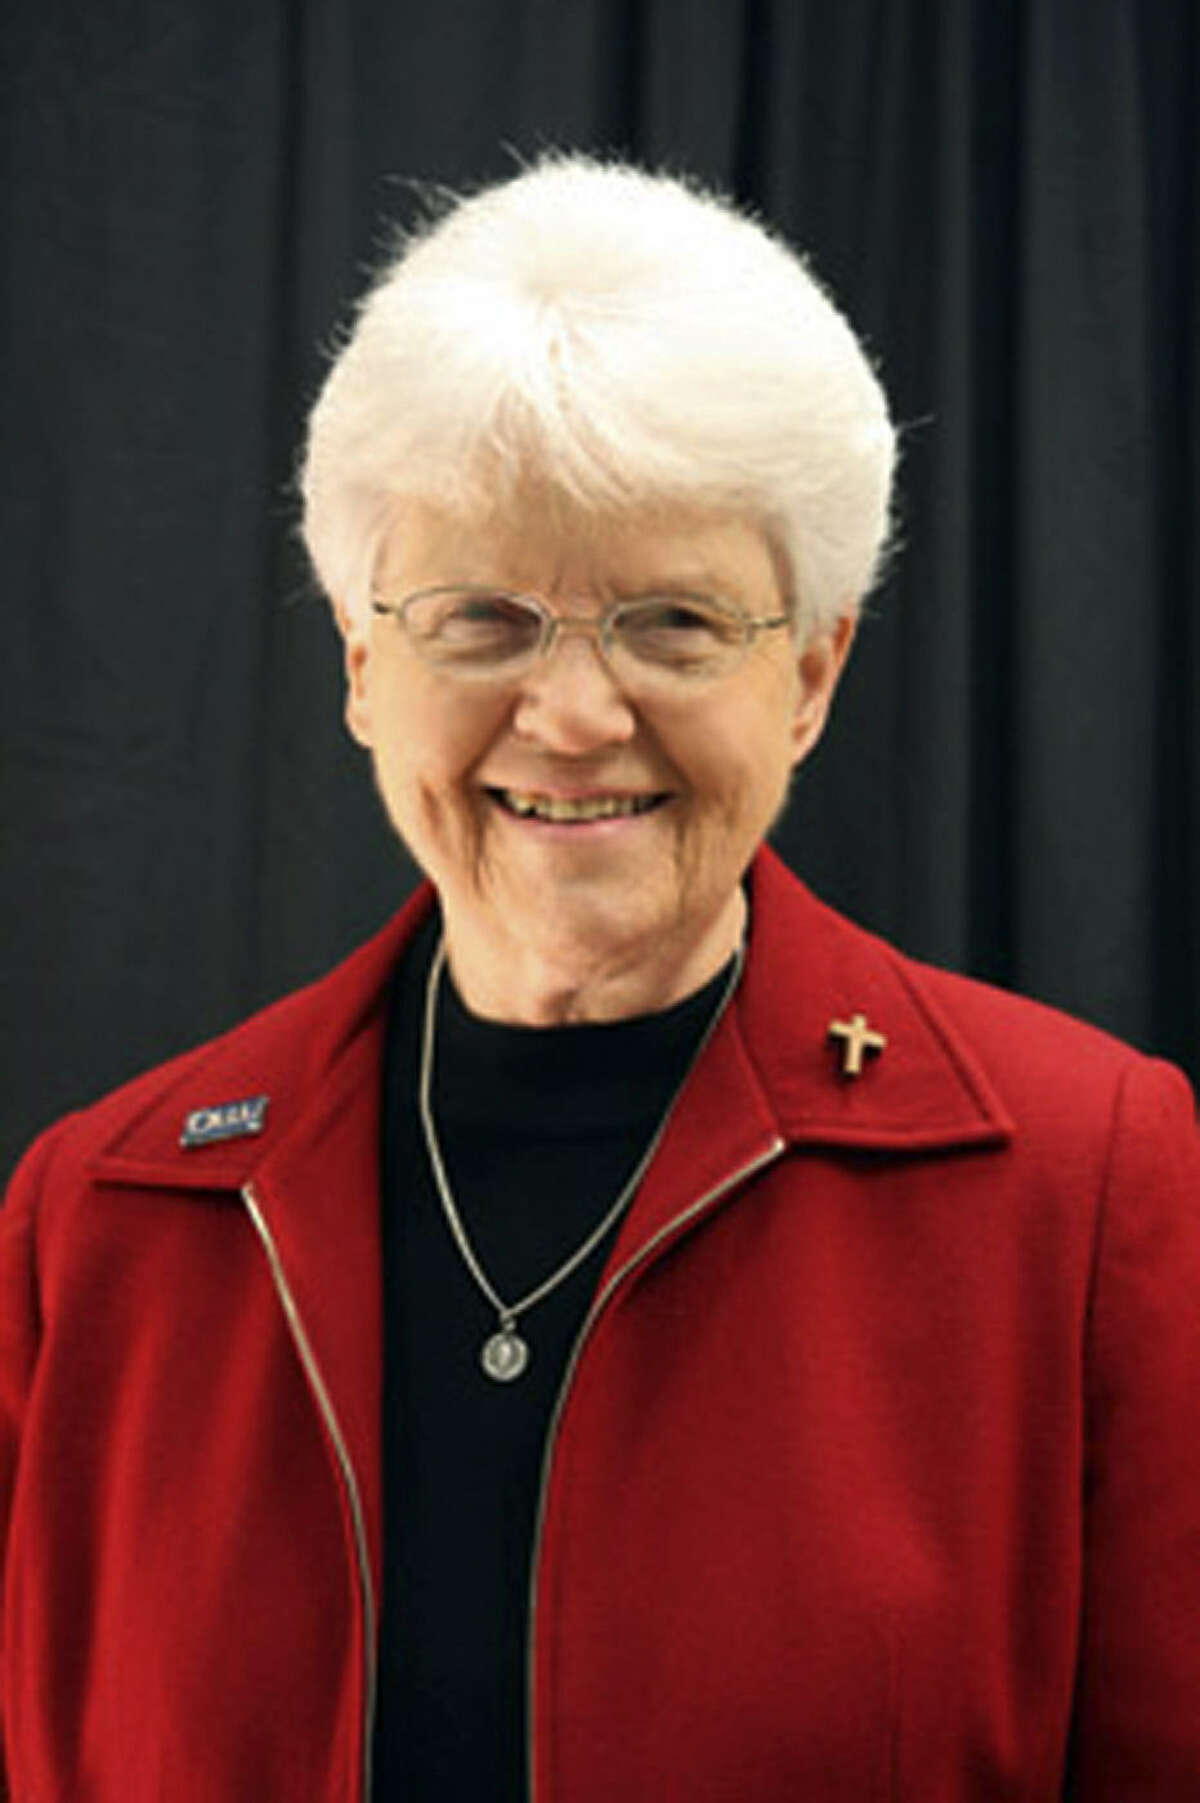 Sister Jane Ann Slater is a former dean of students at the school.